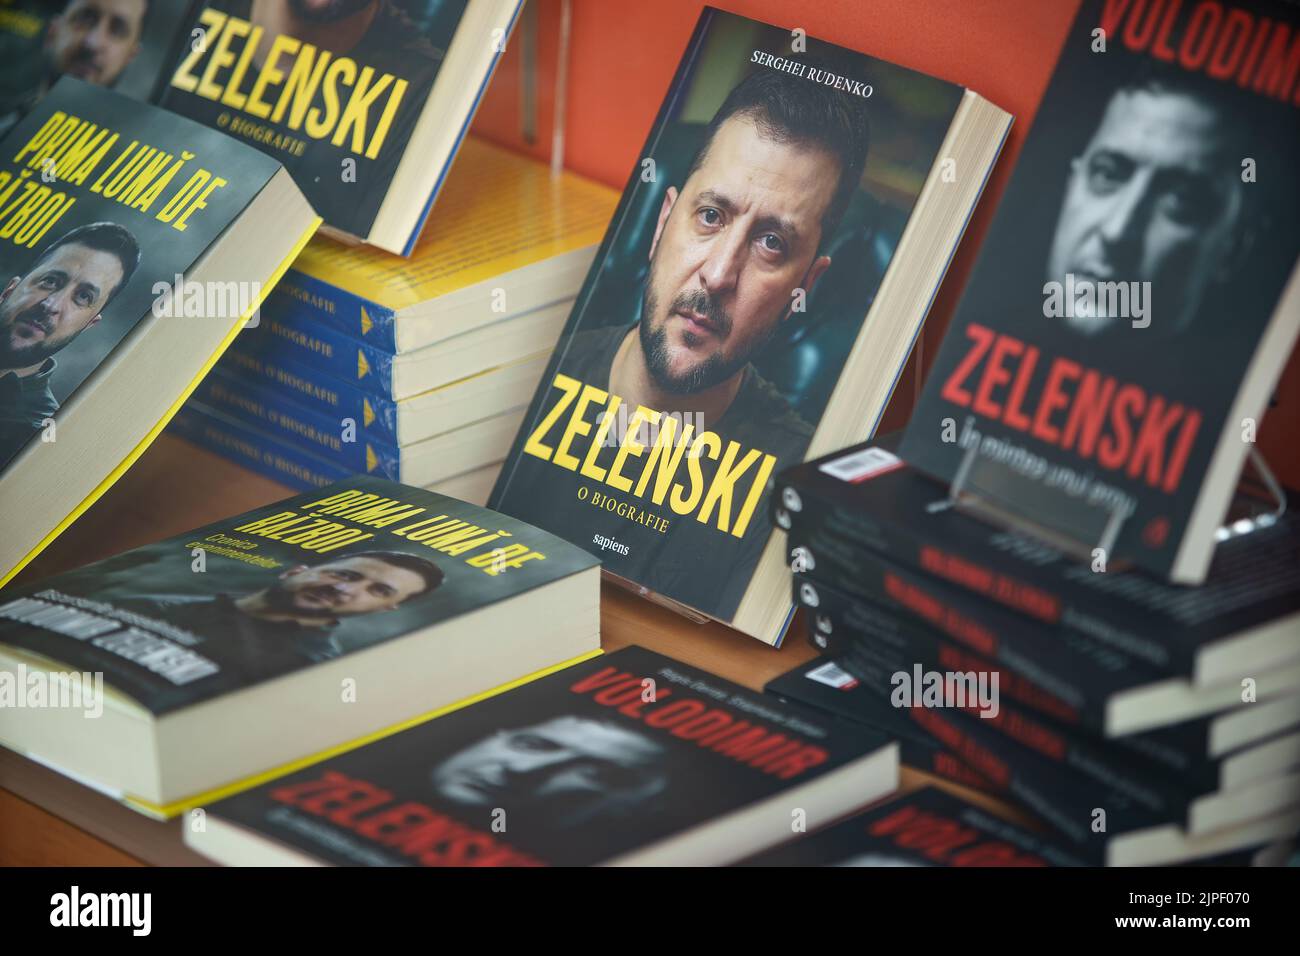 Bucharest, Romania - August 17, 2022: The book Zelenski, A Biography by Serhii Rudenko is seen in a bookstore in Bucharest. This image is for editoria Stock Photo